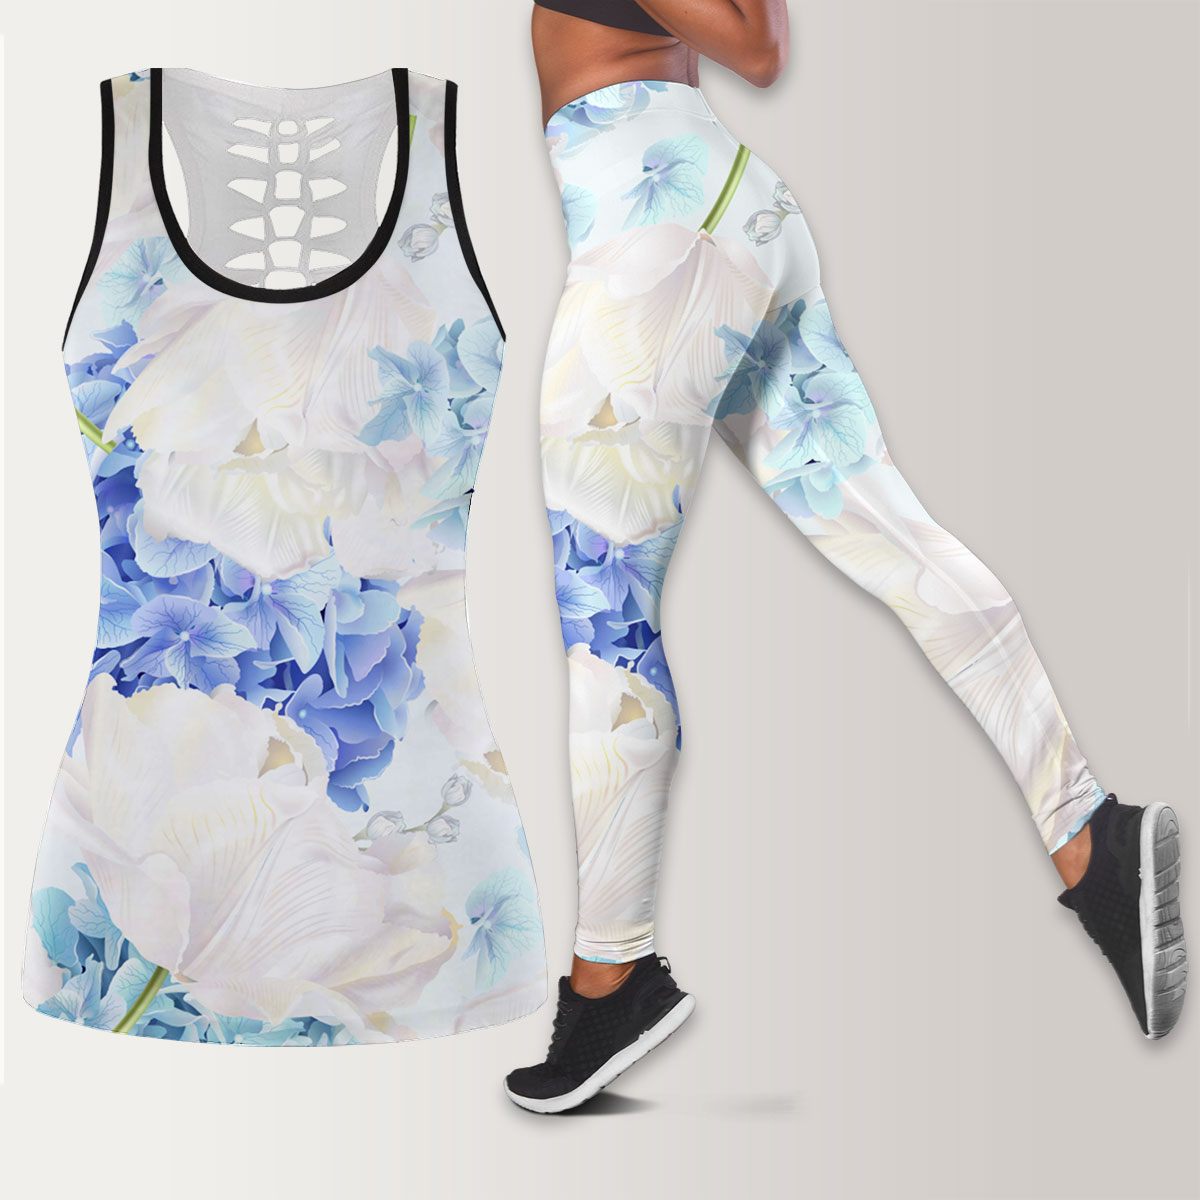 Blue And White Hydrangea Flowers On Blue Background Legging Tank Top set